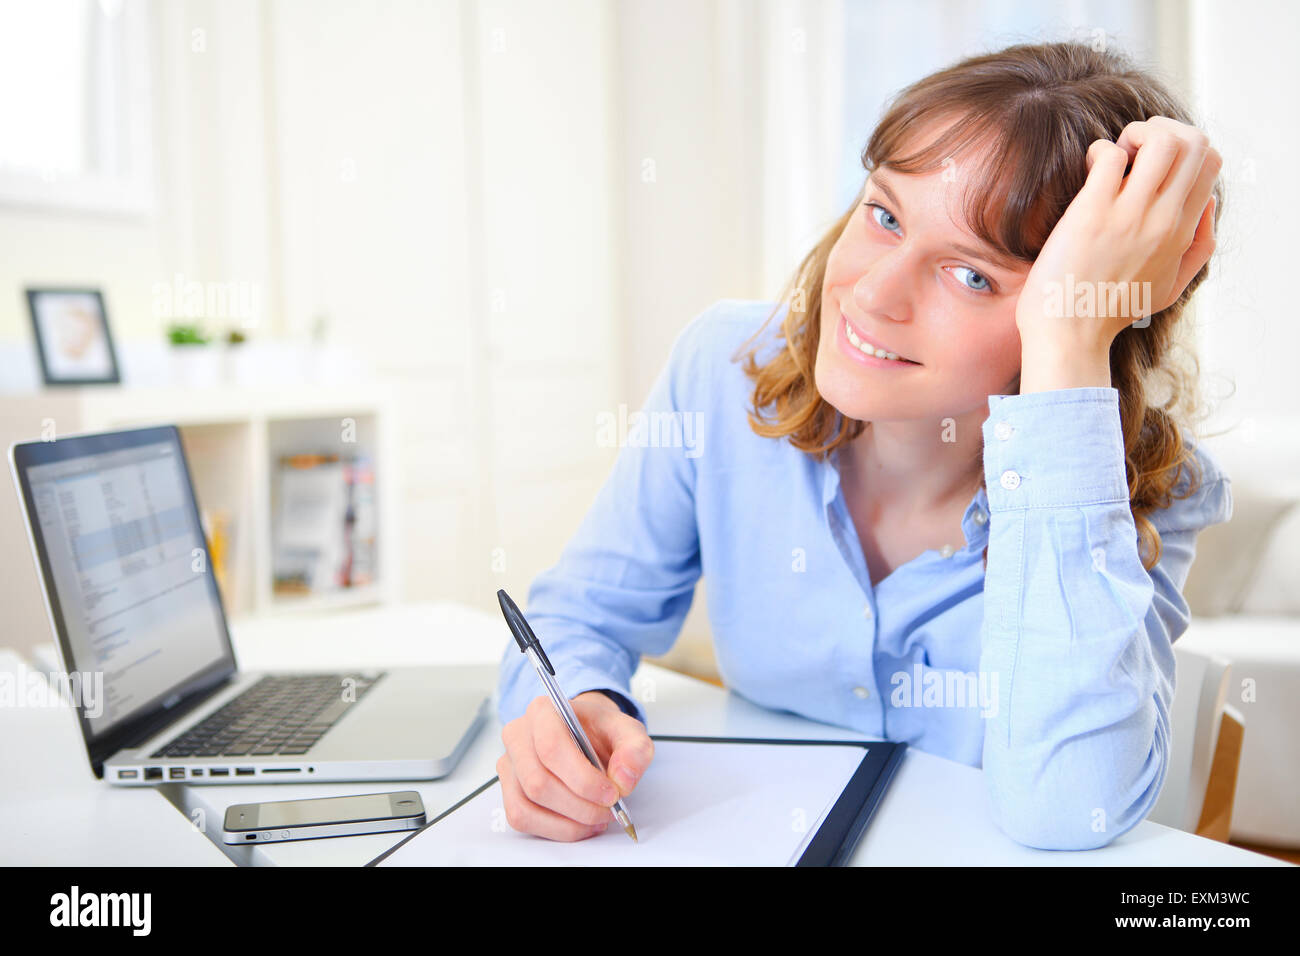 View of a young attractive business woman copying data on paper Stock Photo